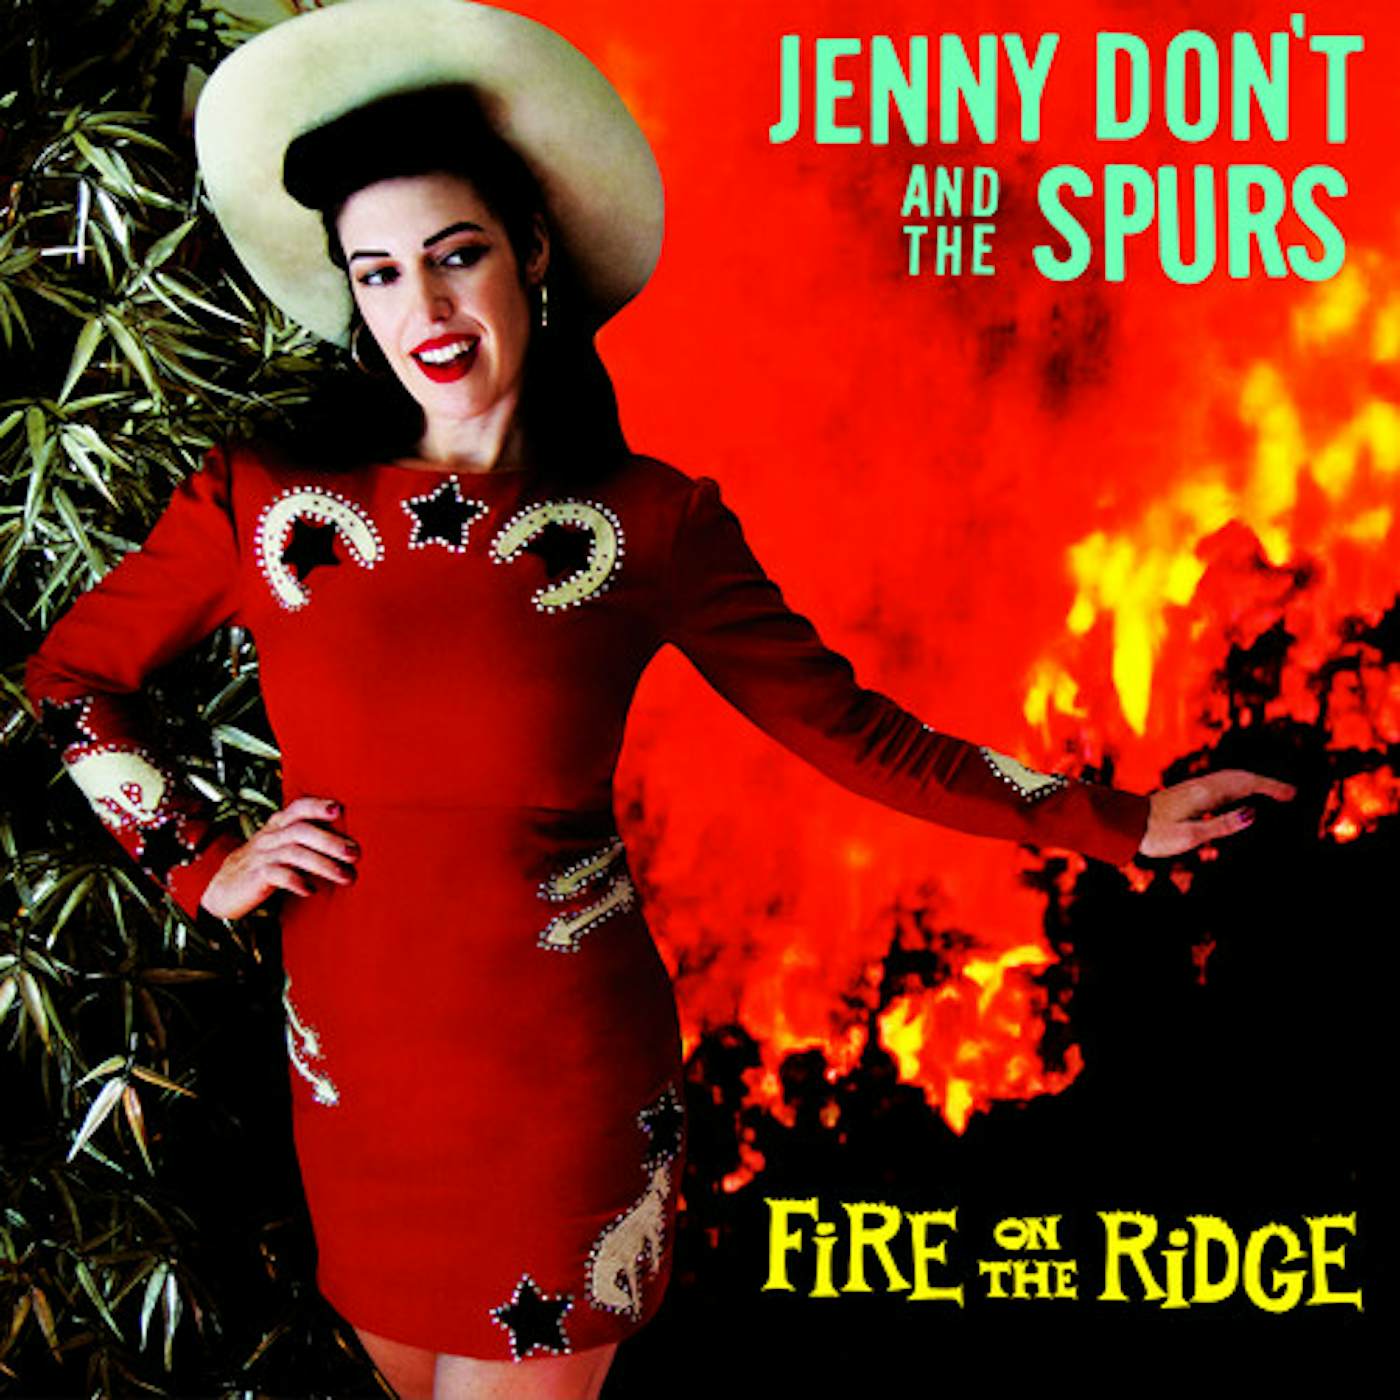 Jenny Don't And The Spurs FIRE ON THE RIDGE CD